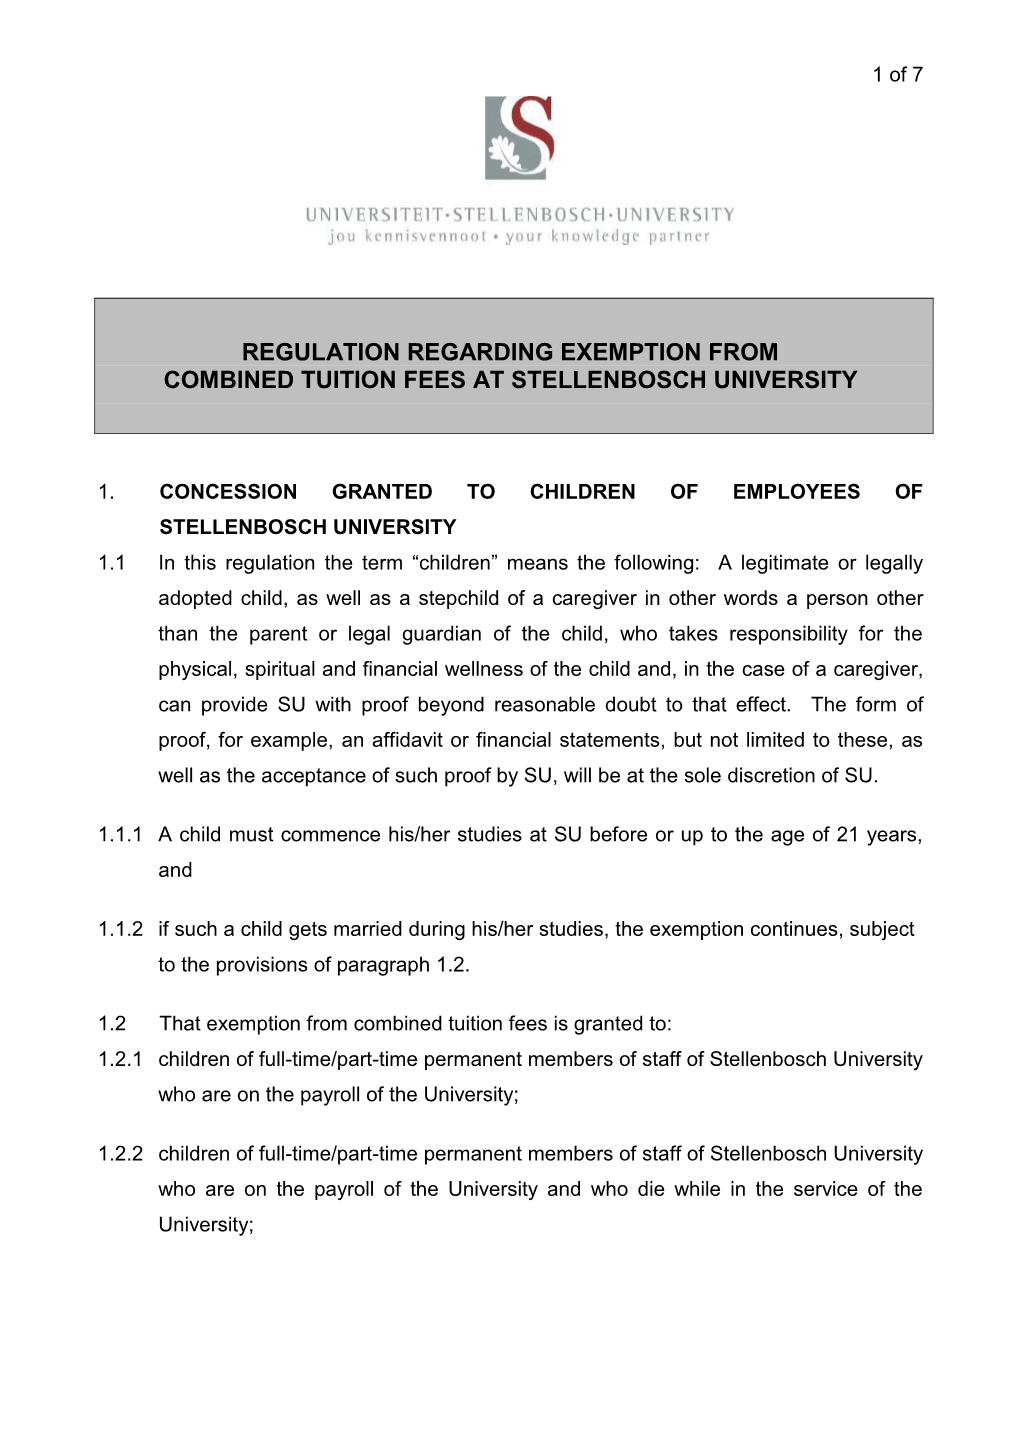 Regulation Regarding Exemption from Combined Tuition Fees at Stellenbosch University